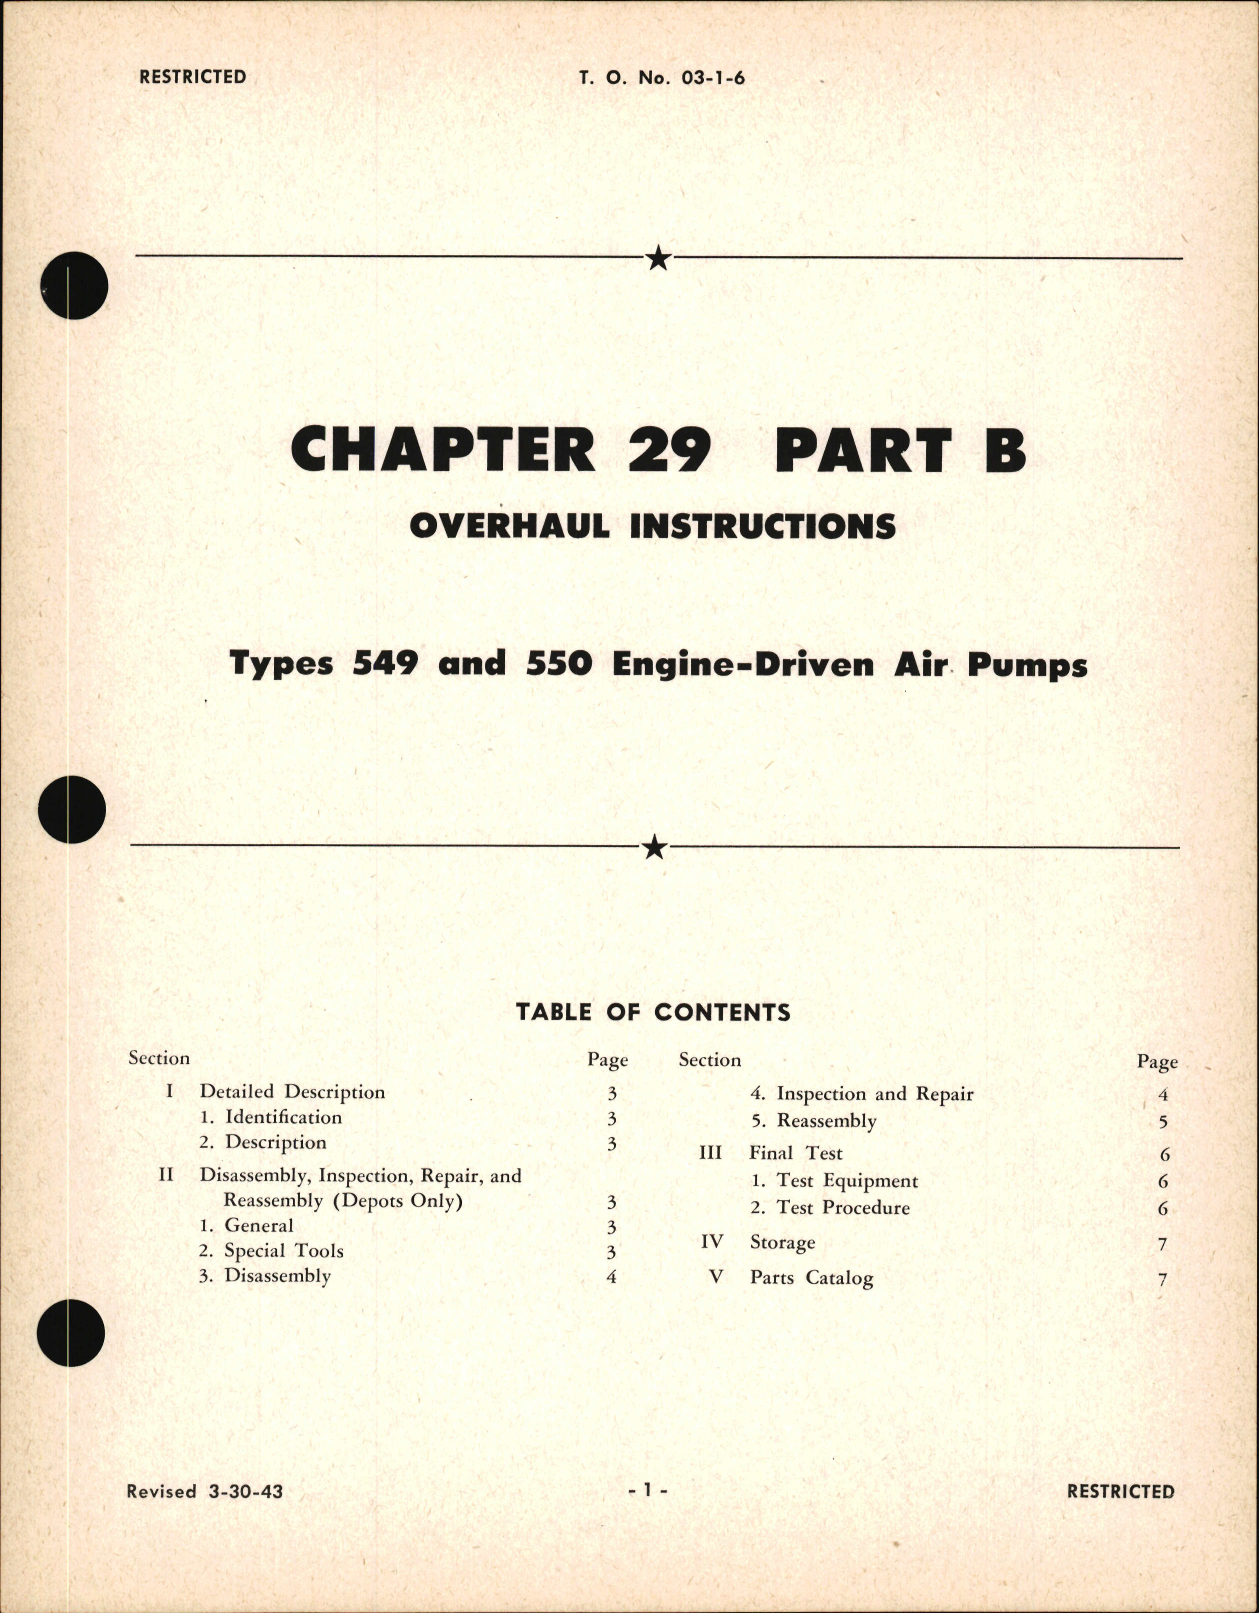 Sample page 1 from AirCorps Library document: Overhaul Instructions for Engine Driven Air Pumps Type 549 & 550